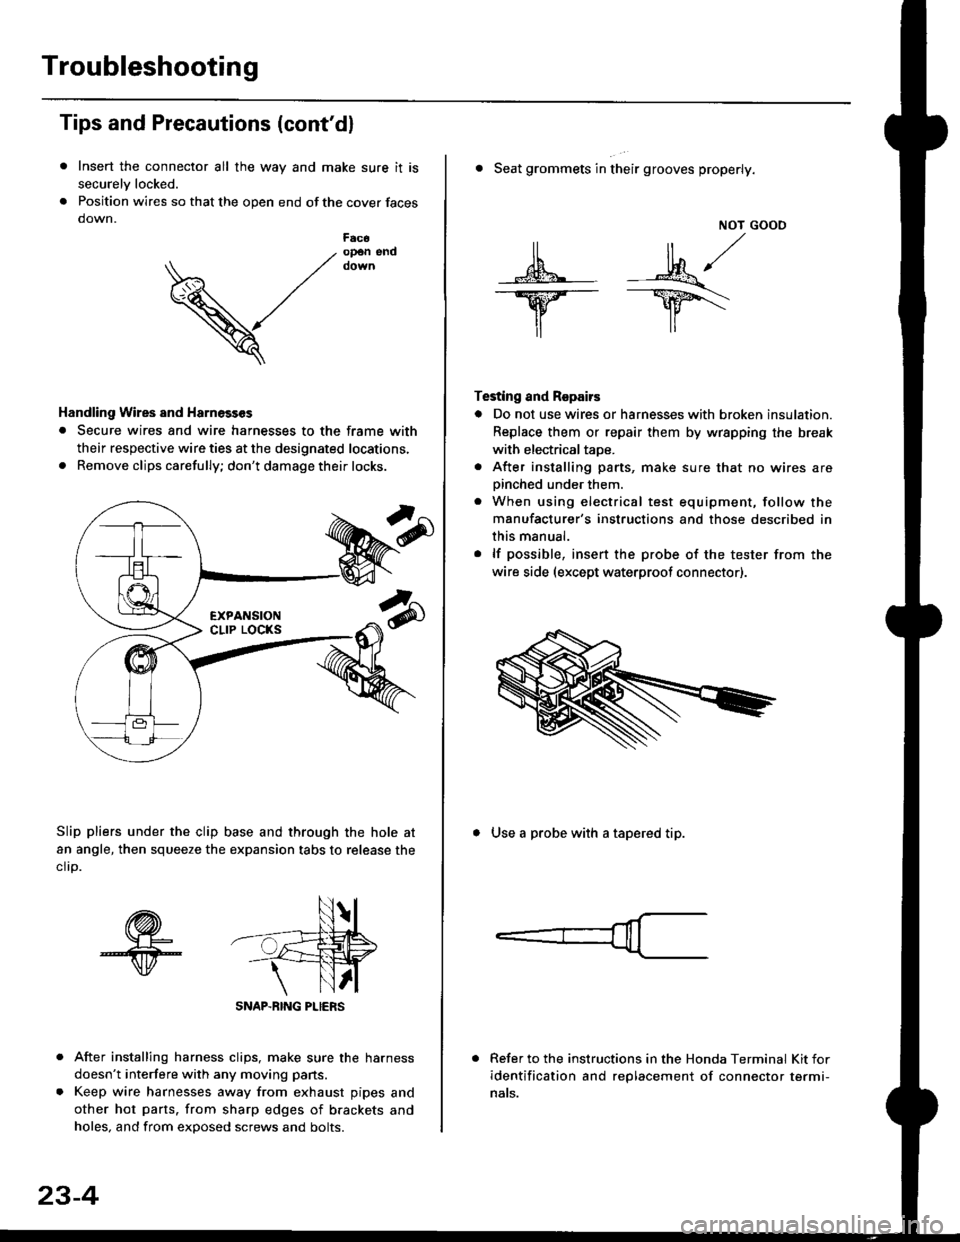 HONDA CIVIC 1999 6.G Workshop Manual Troubleshooting
Tips and Precautions (contdl
Insert the connector all the way and make sure it is
securelv locked.
Position wires so that the open end of the cover faces
down.
After installing harnes